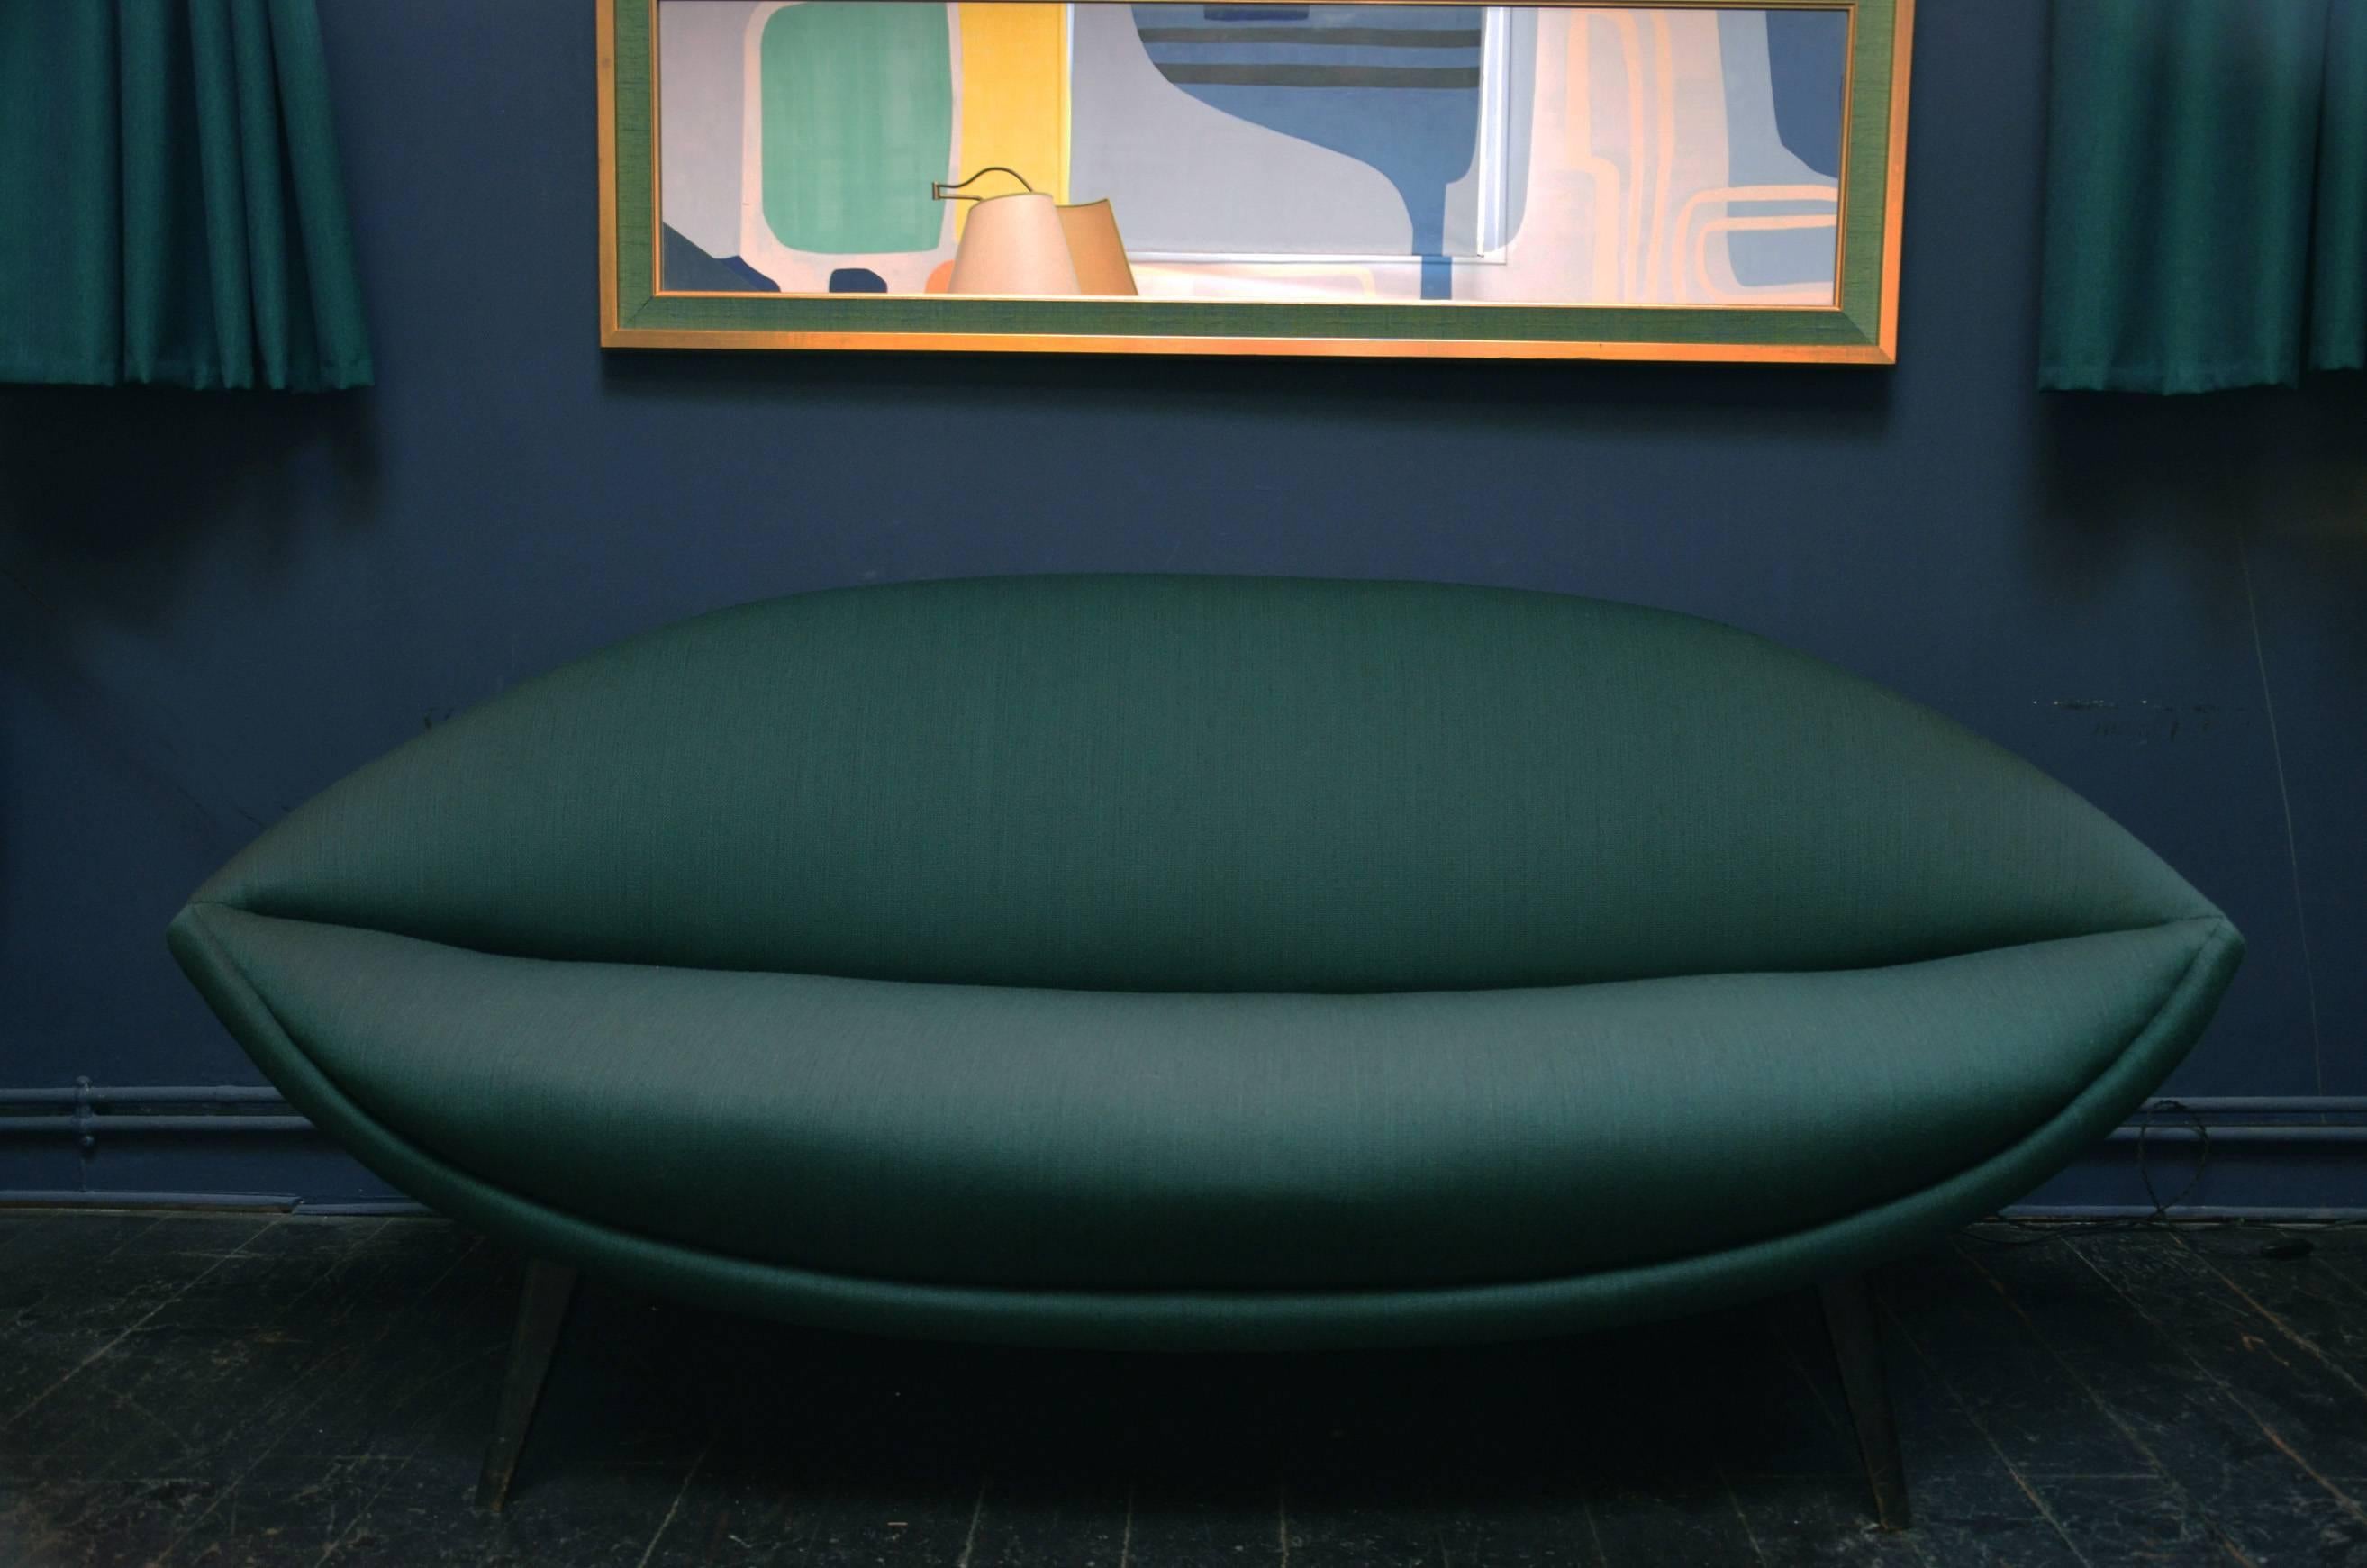 Exceptional free-form sculptural sofa by Sweden designer Folke Jansson.
Very rare seen sofa with exceptional design in perfect vintage condition.
Re-upholstered with handmade seams in a woven wool fabric by Kvadrat in a a deep green color.
Wooden